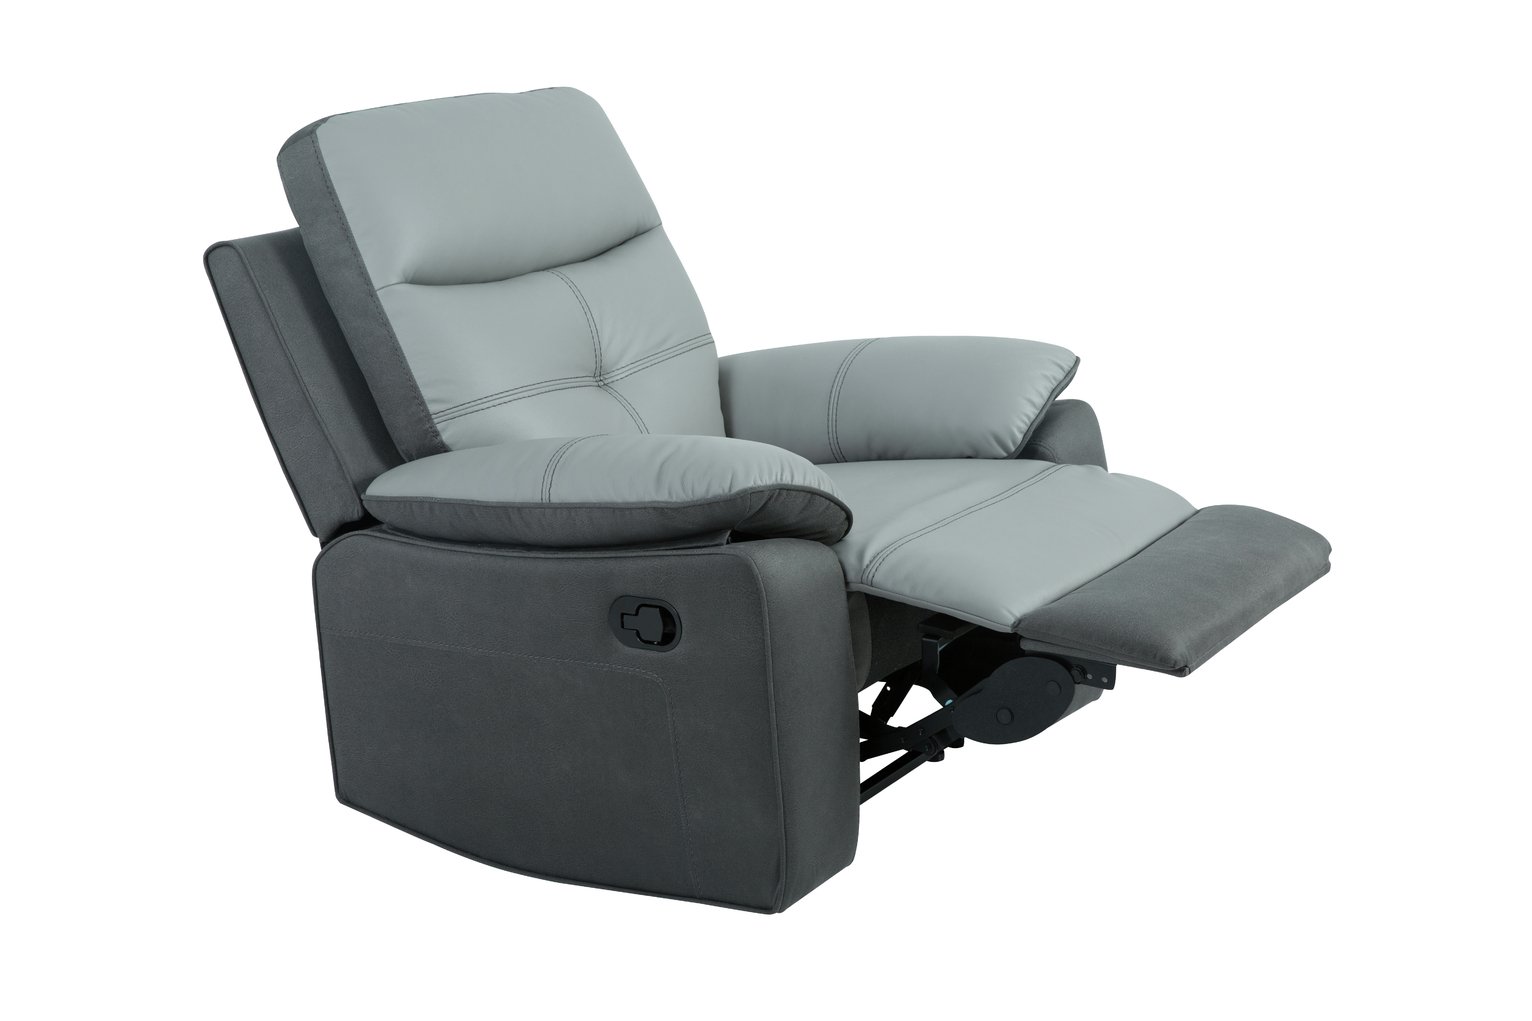 Argos Home Charles Leather Mix Manual Recliner Chair - Grey